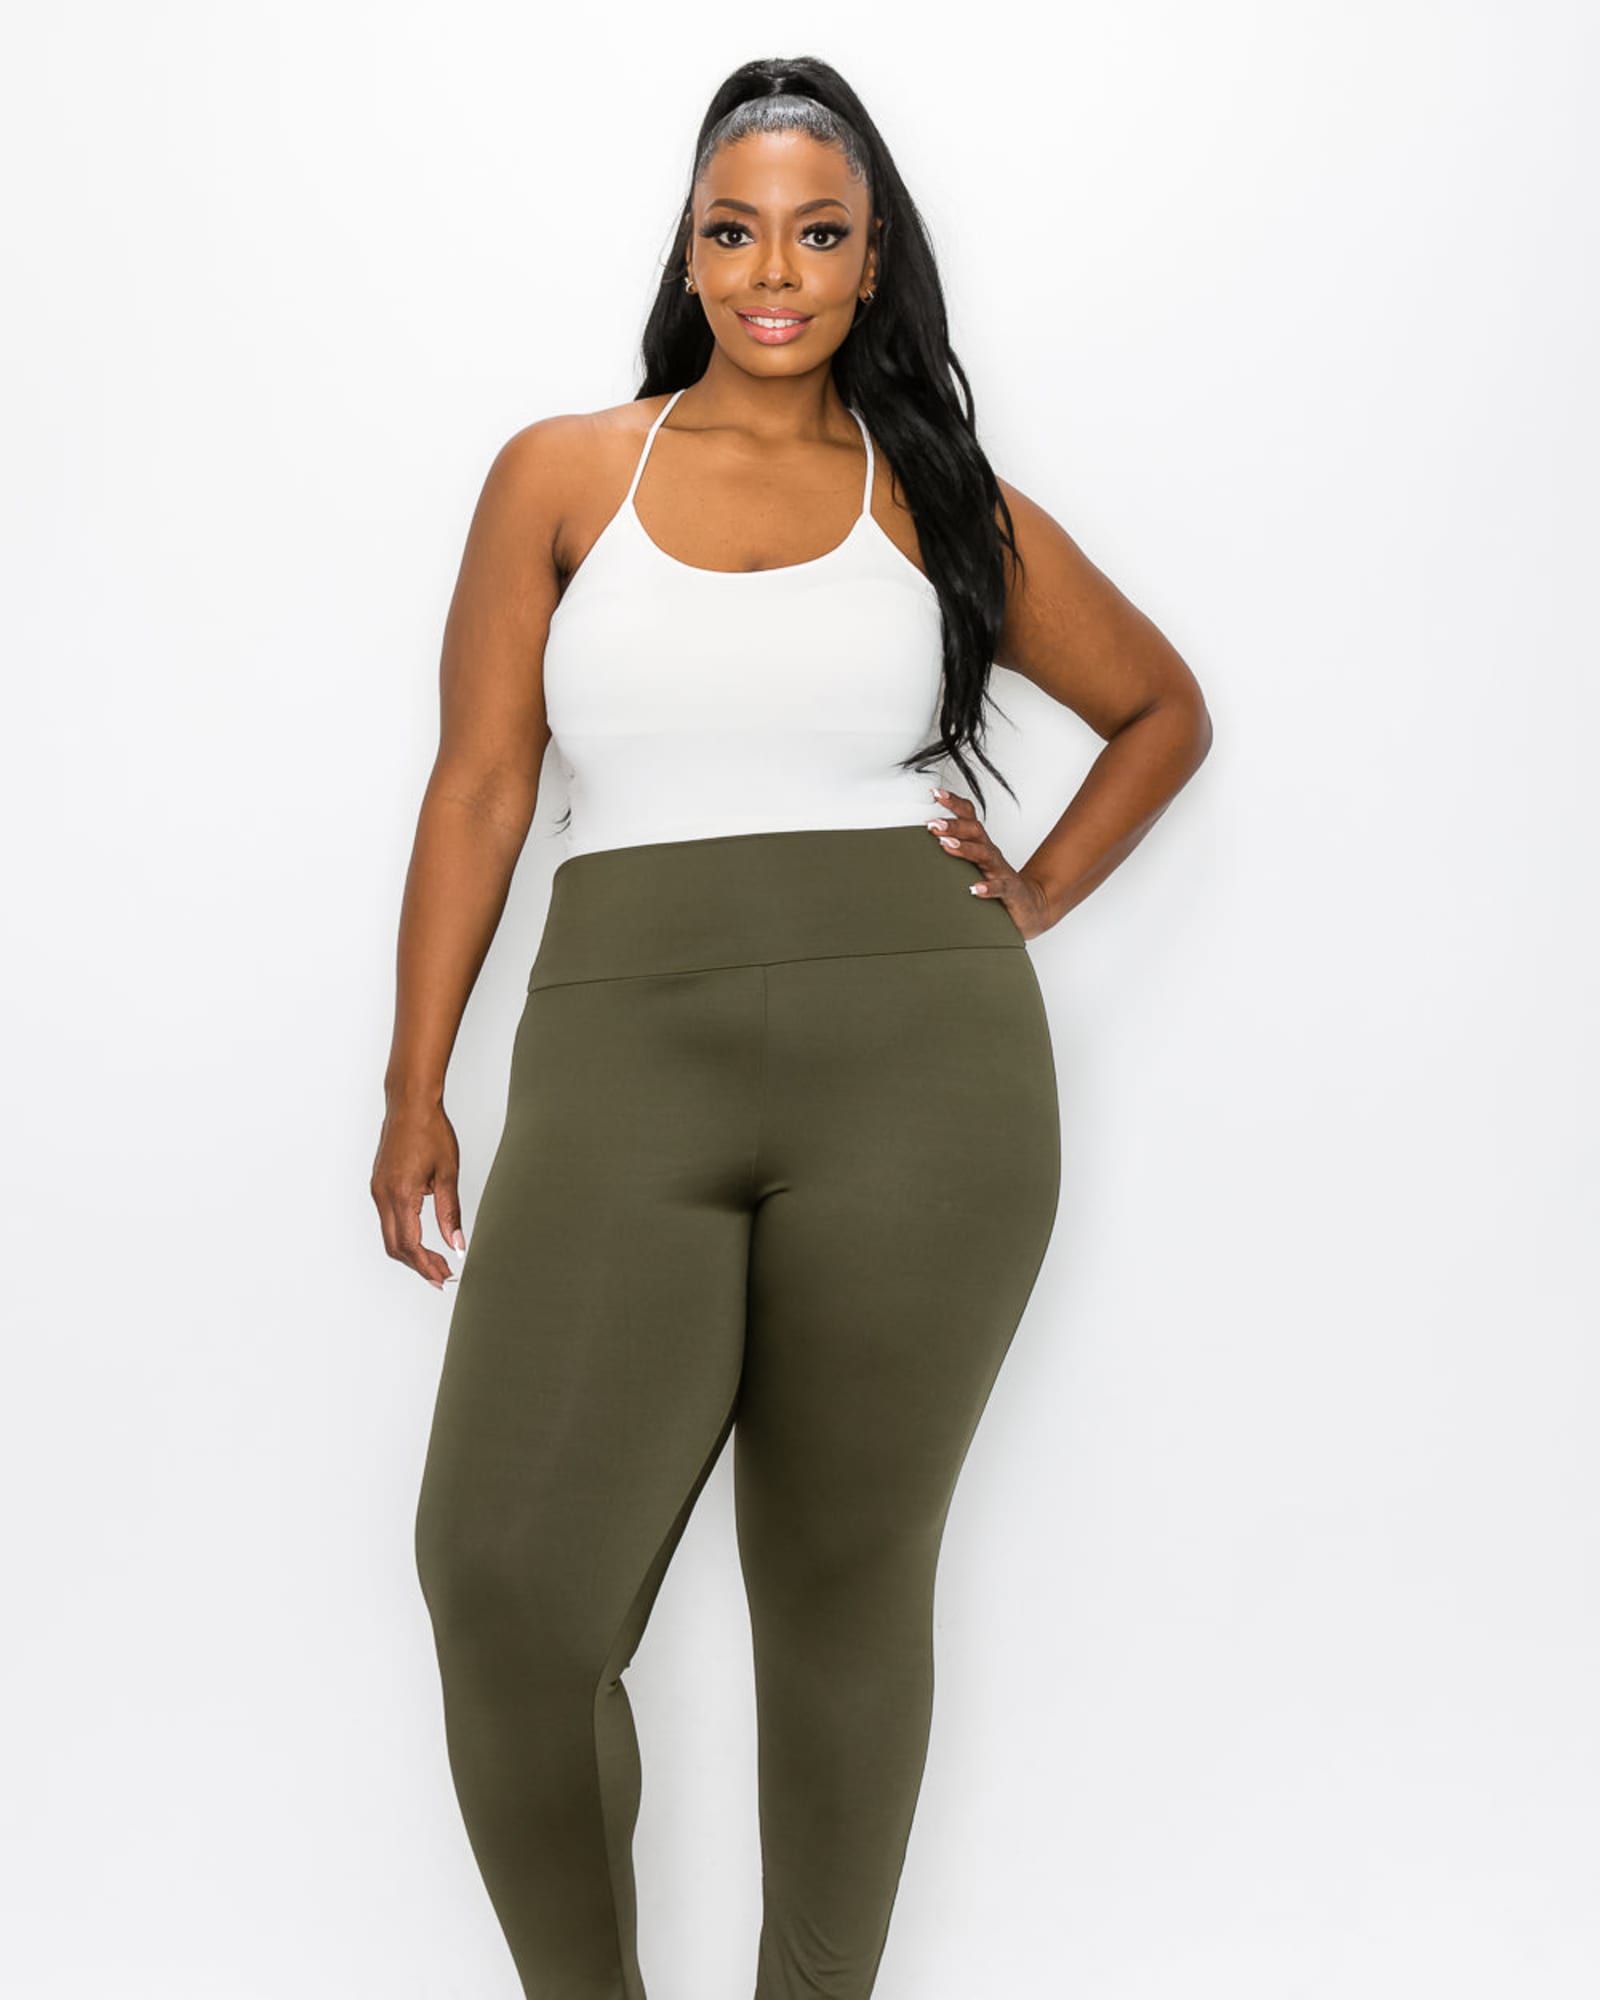 Where to find plus size yoga pants & workout clothes - Body Positive Yoga